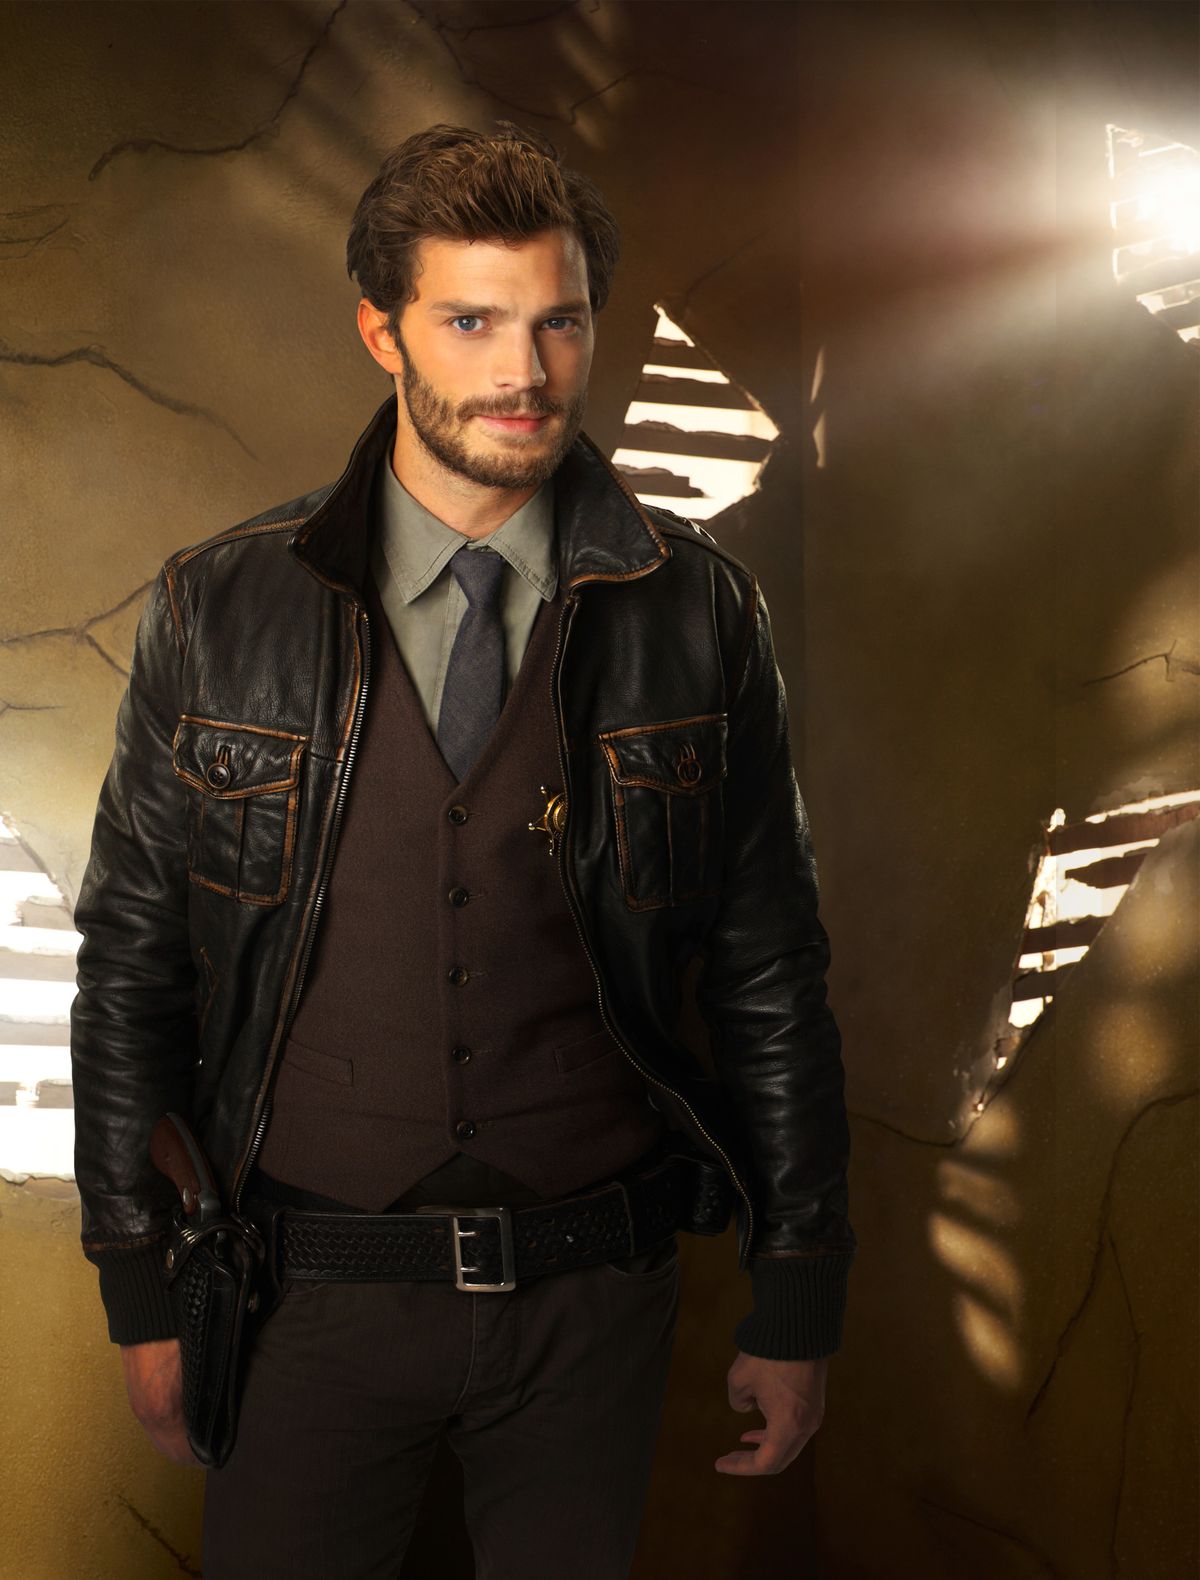 Jamie Dornan gets ‘Fifty Shades of Gray’ lead | The Spokesman-Review